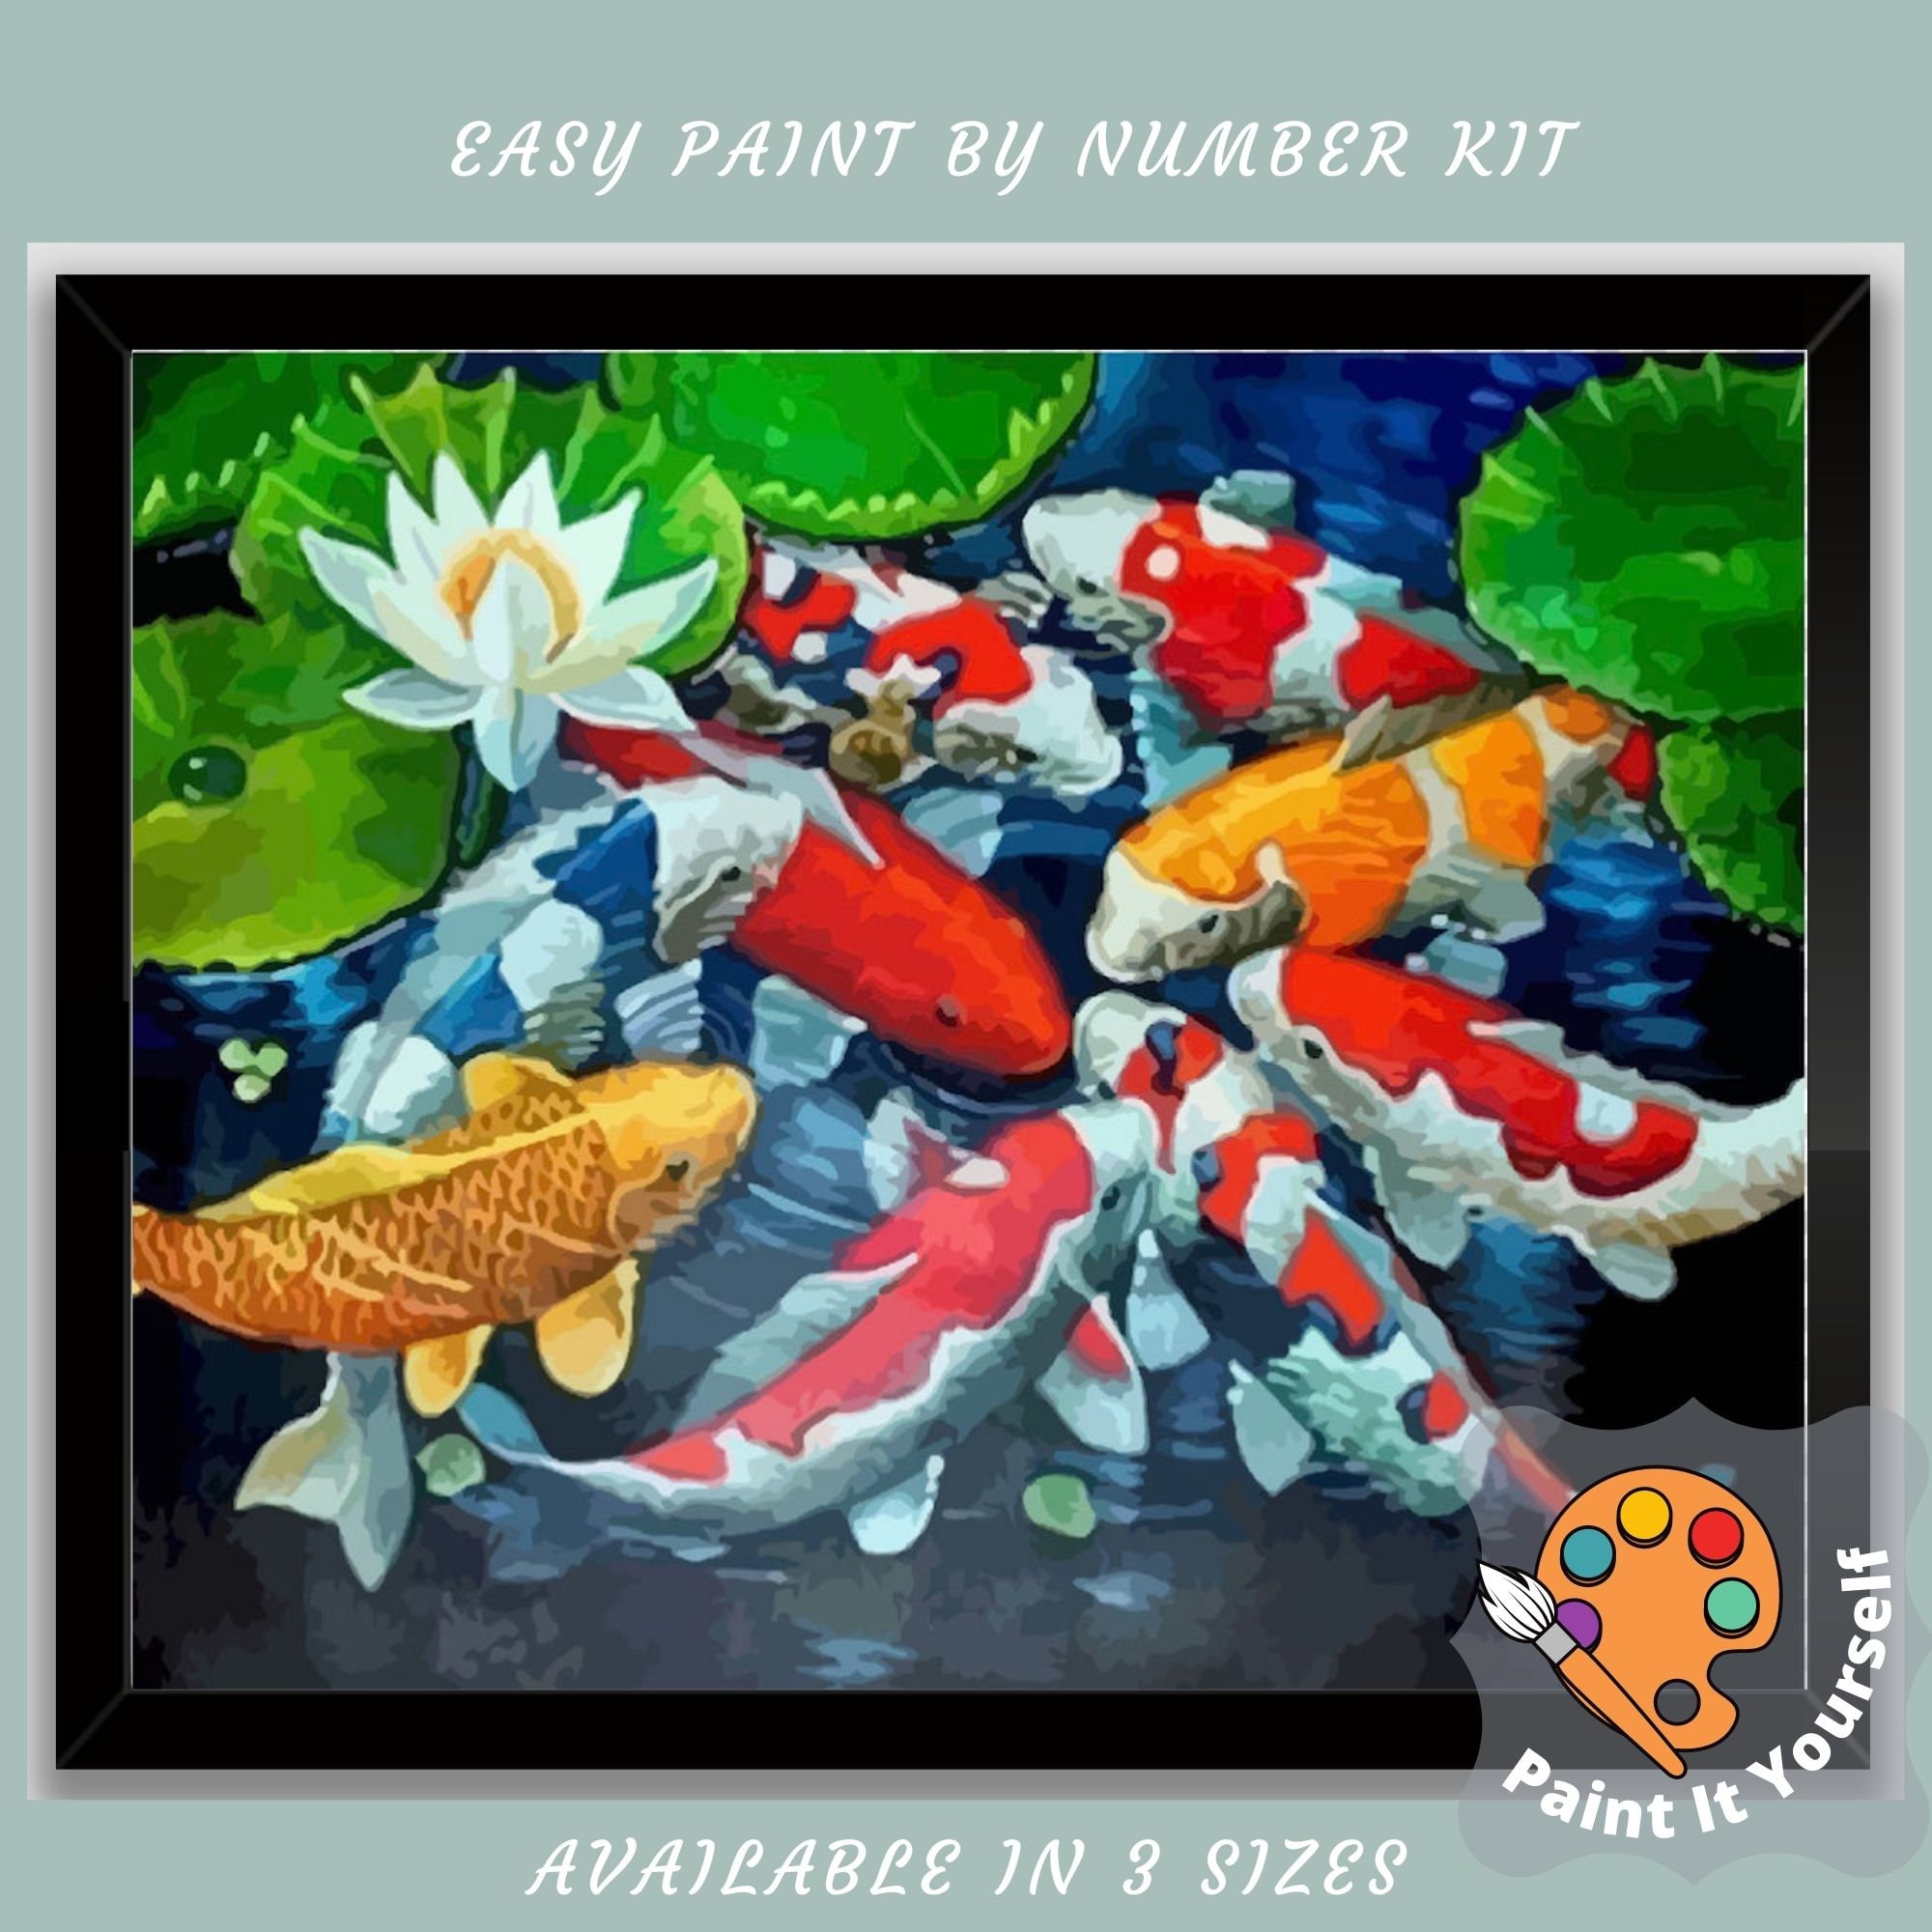 Paint by Numbers for Adults- 20x40 Inch Linen Canvas Paintworks - Digital  Oil Painting Canvas Kits for Adults Children Kids Decorations Gifts koi  fish